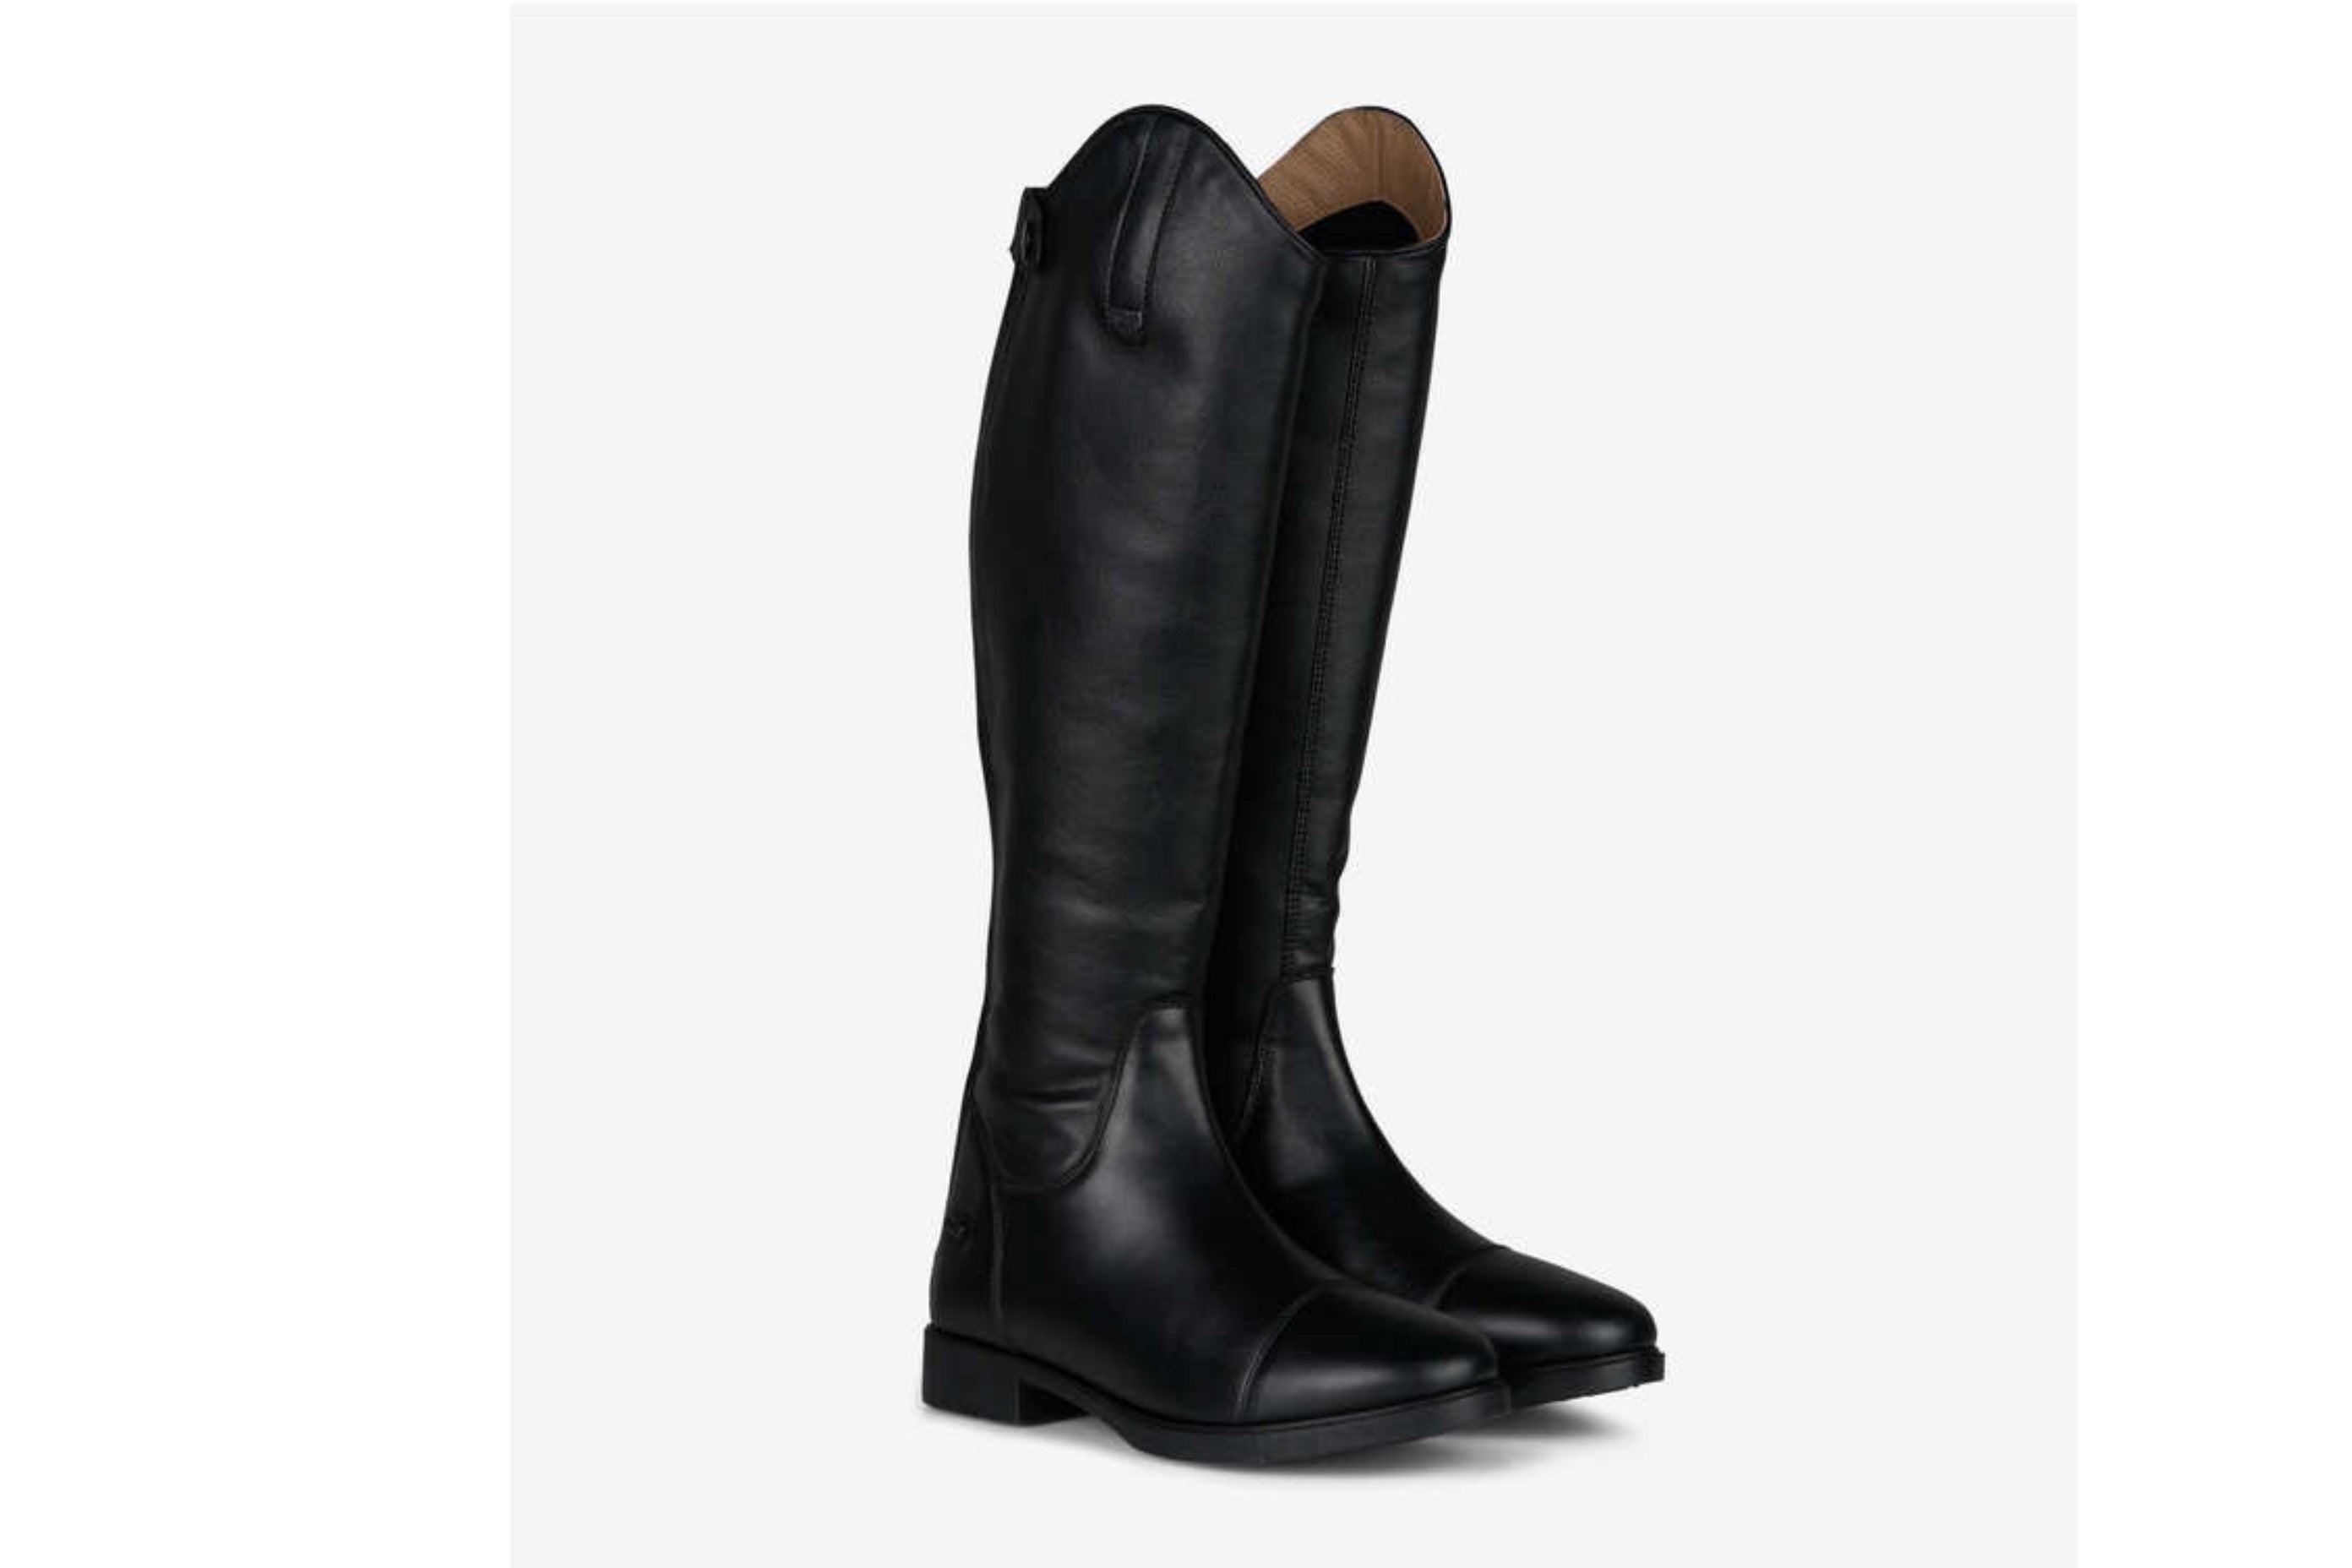 HZ Rover Black Tall Dressage Boots -STOCK DUE EARLY APRIL